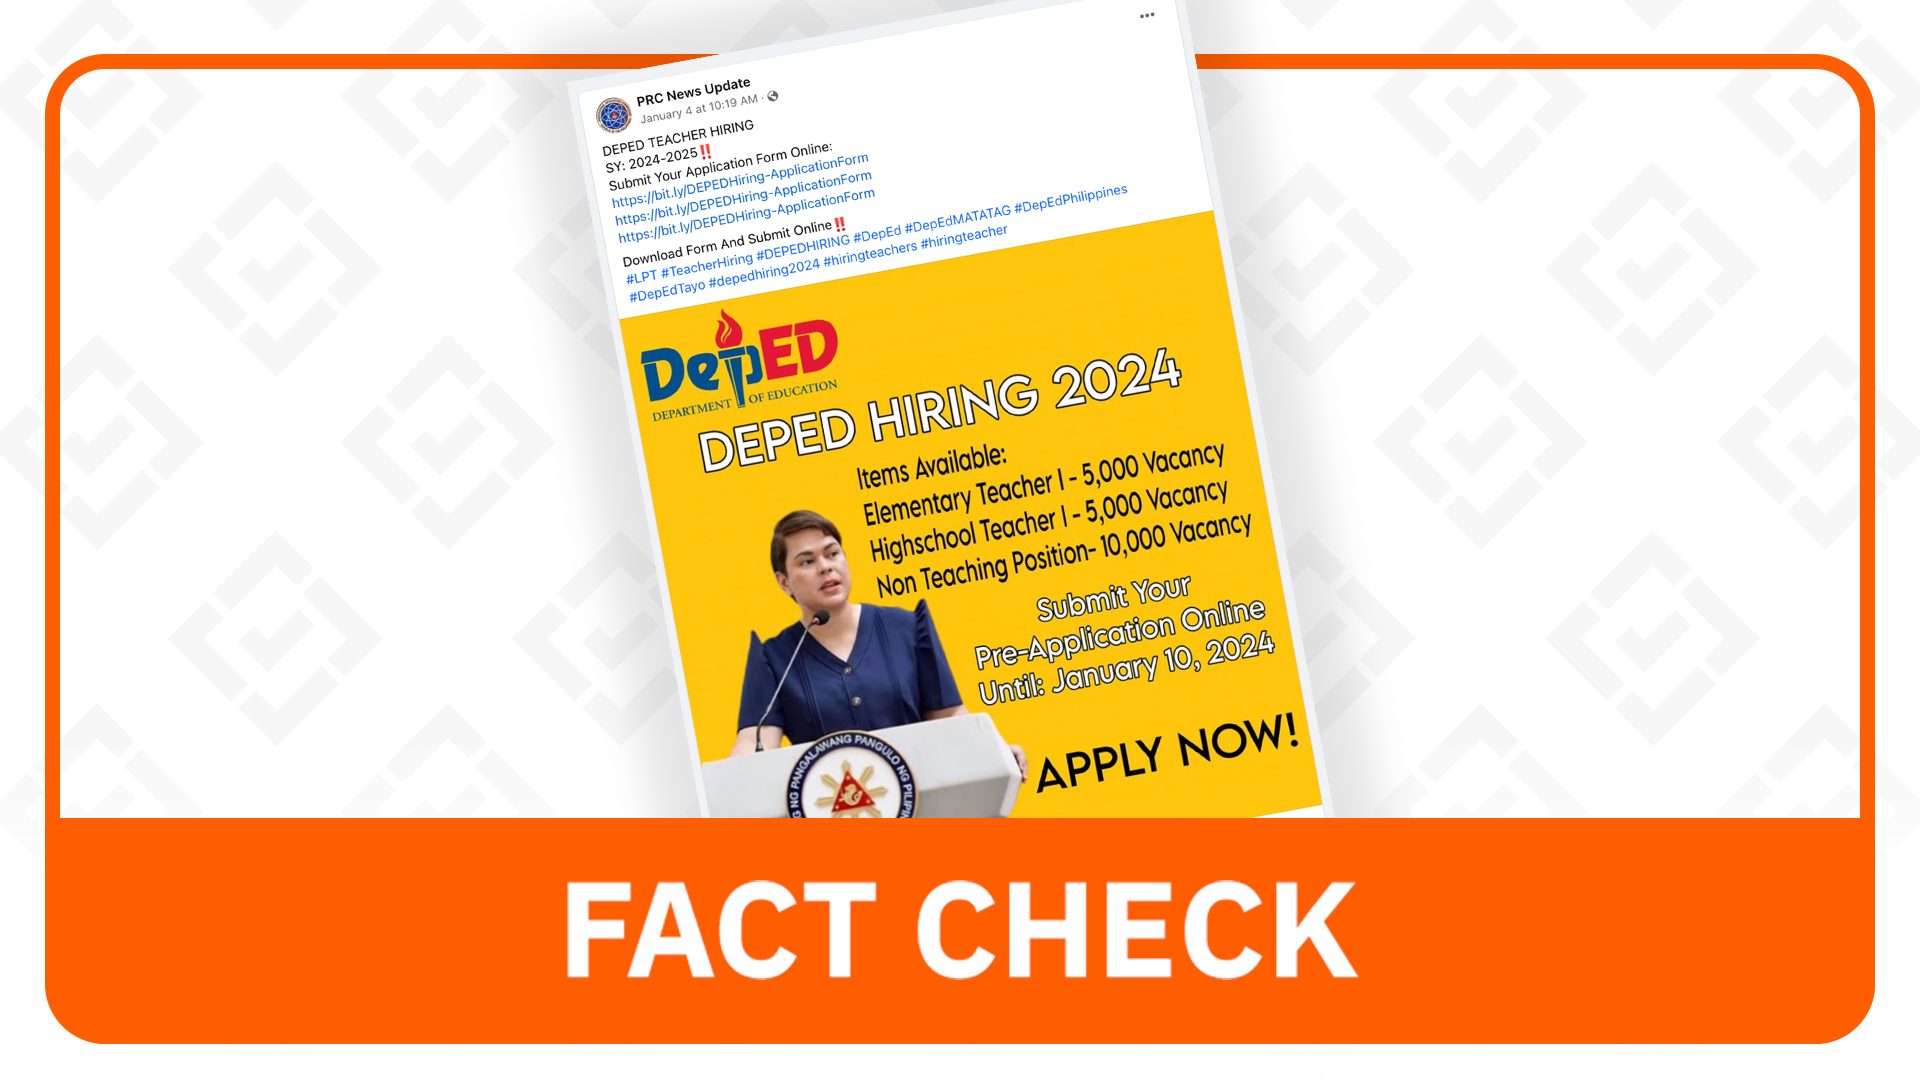 FACT CHECK: Post on teacher job openings not from DepEd